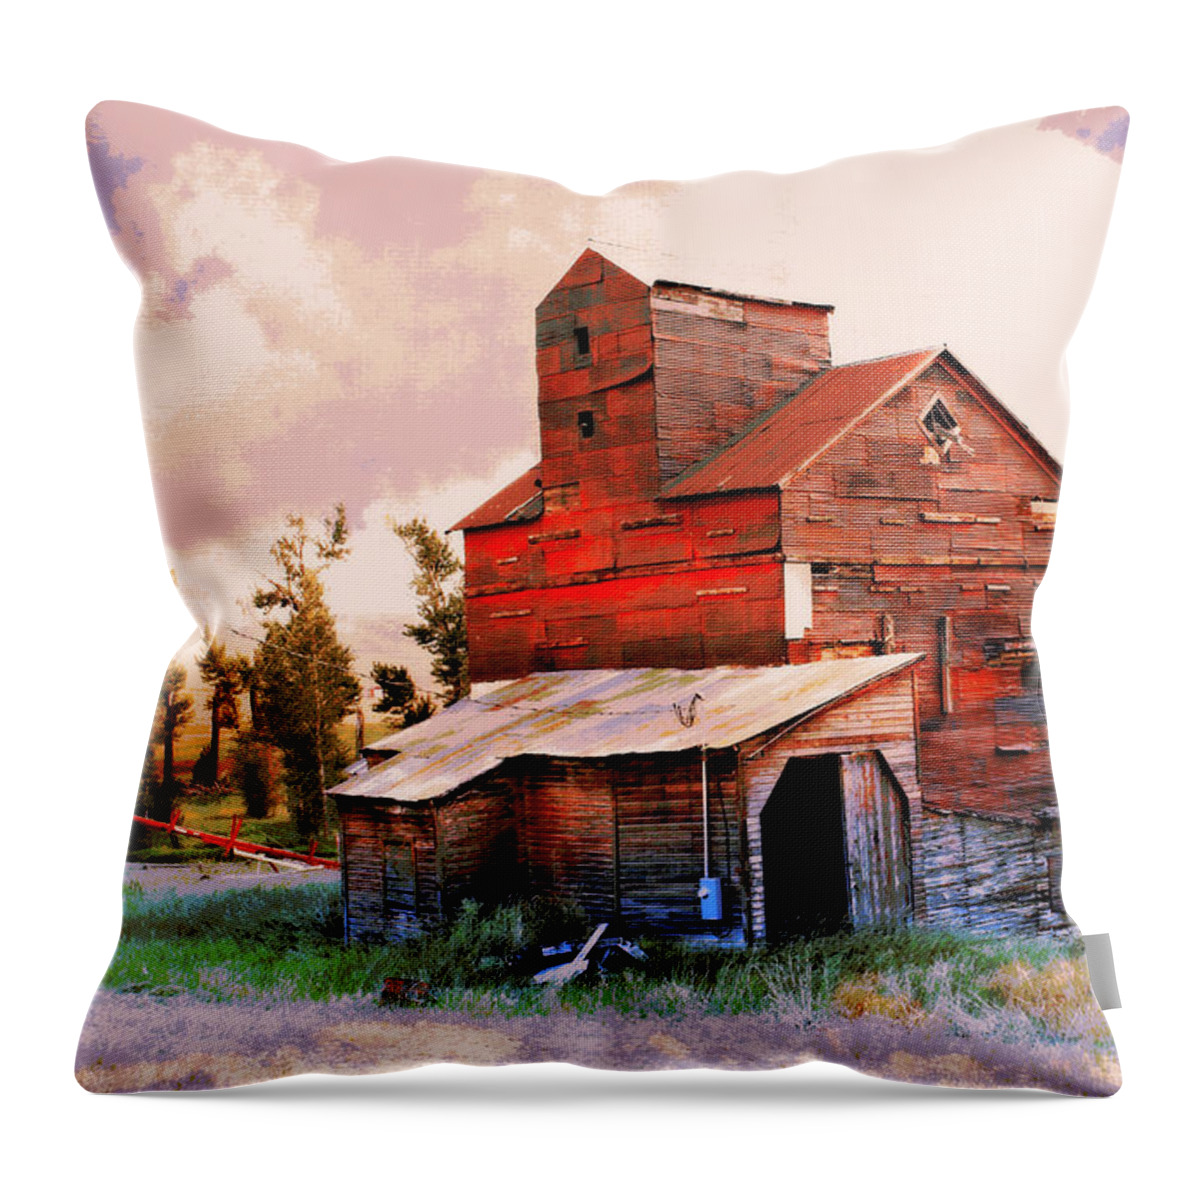 Grain Elevator Throw Pillow featuring the photograph Against The Grain by Marty Koch